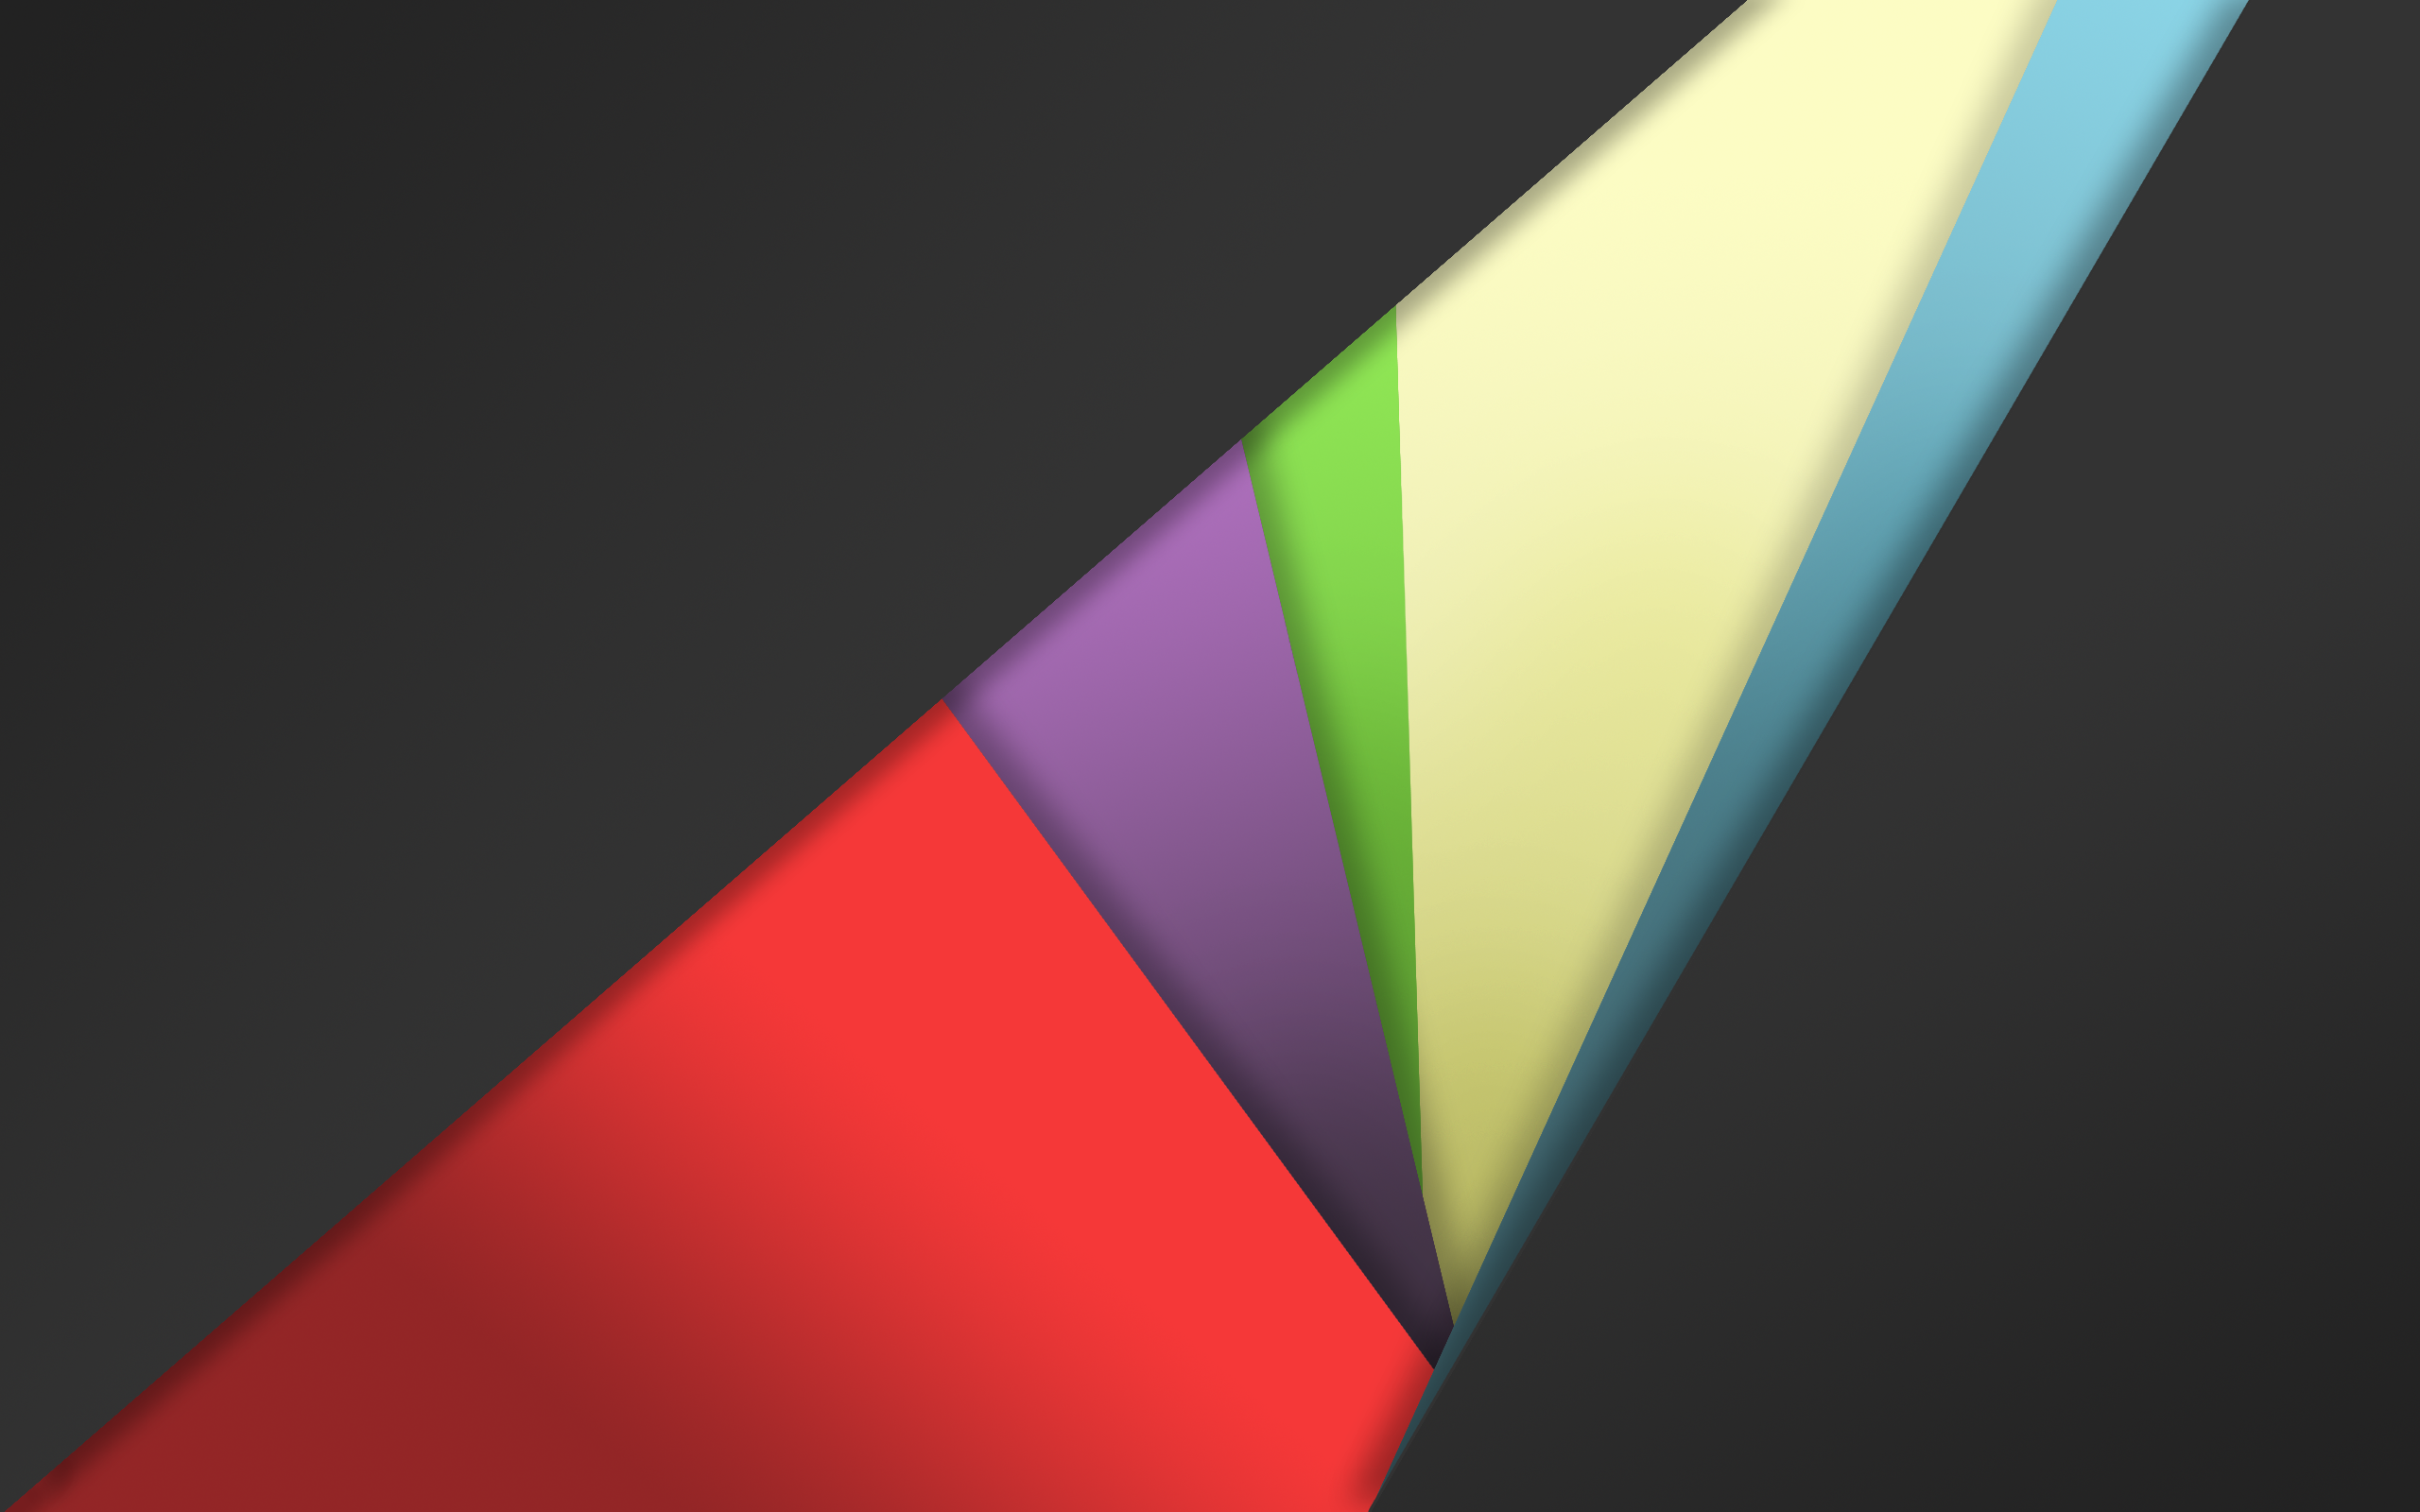 material design wallpapers desktop,green,line,colorfulness,triangle,graphic design